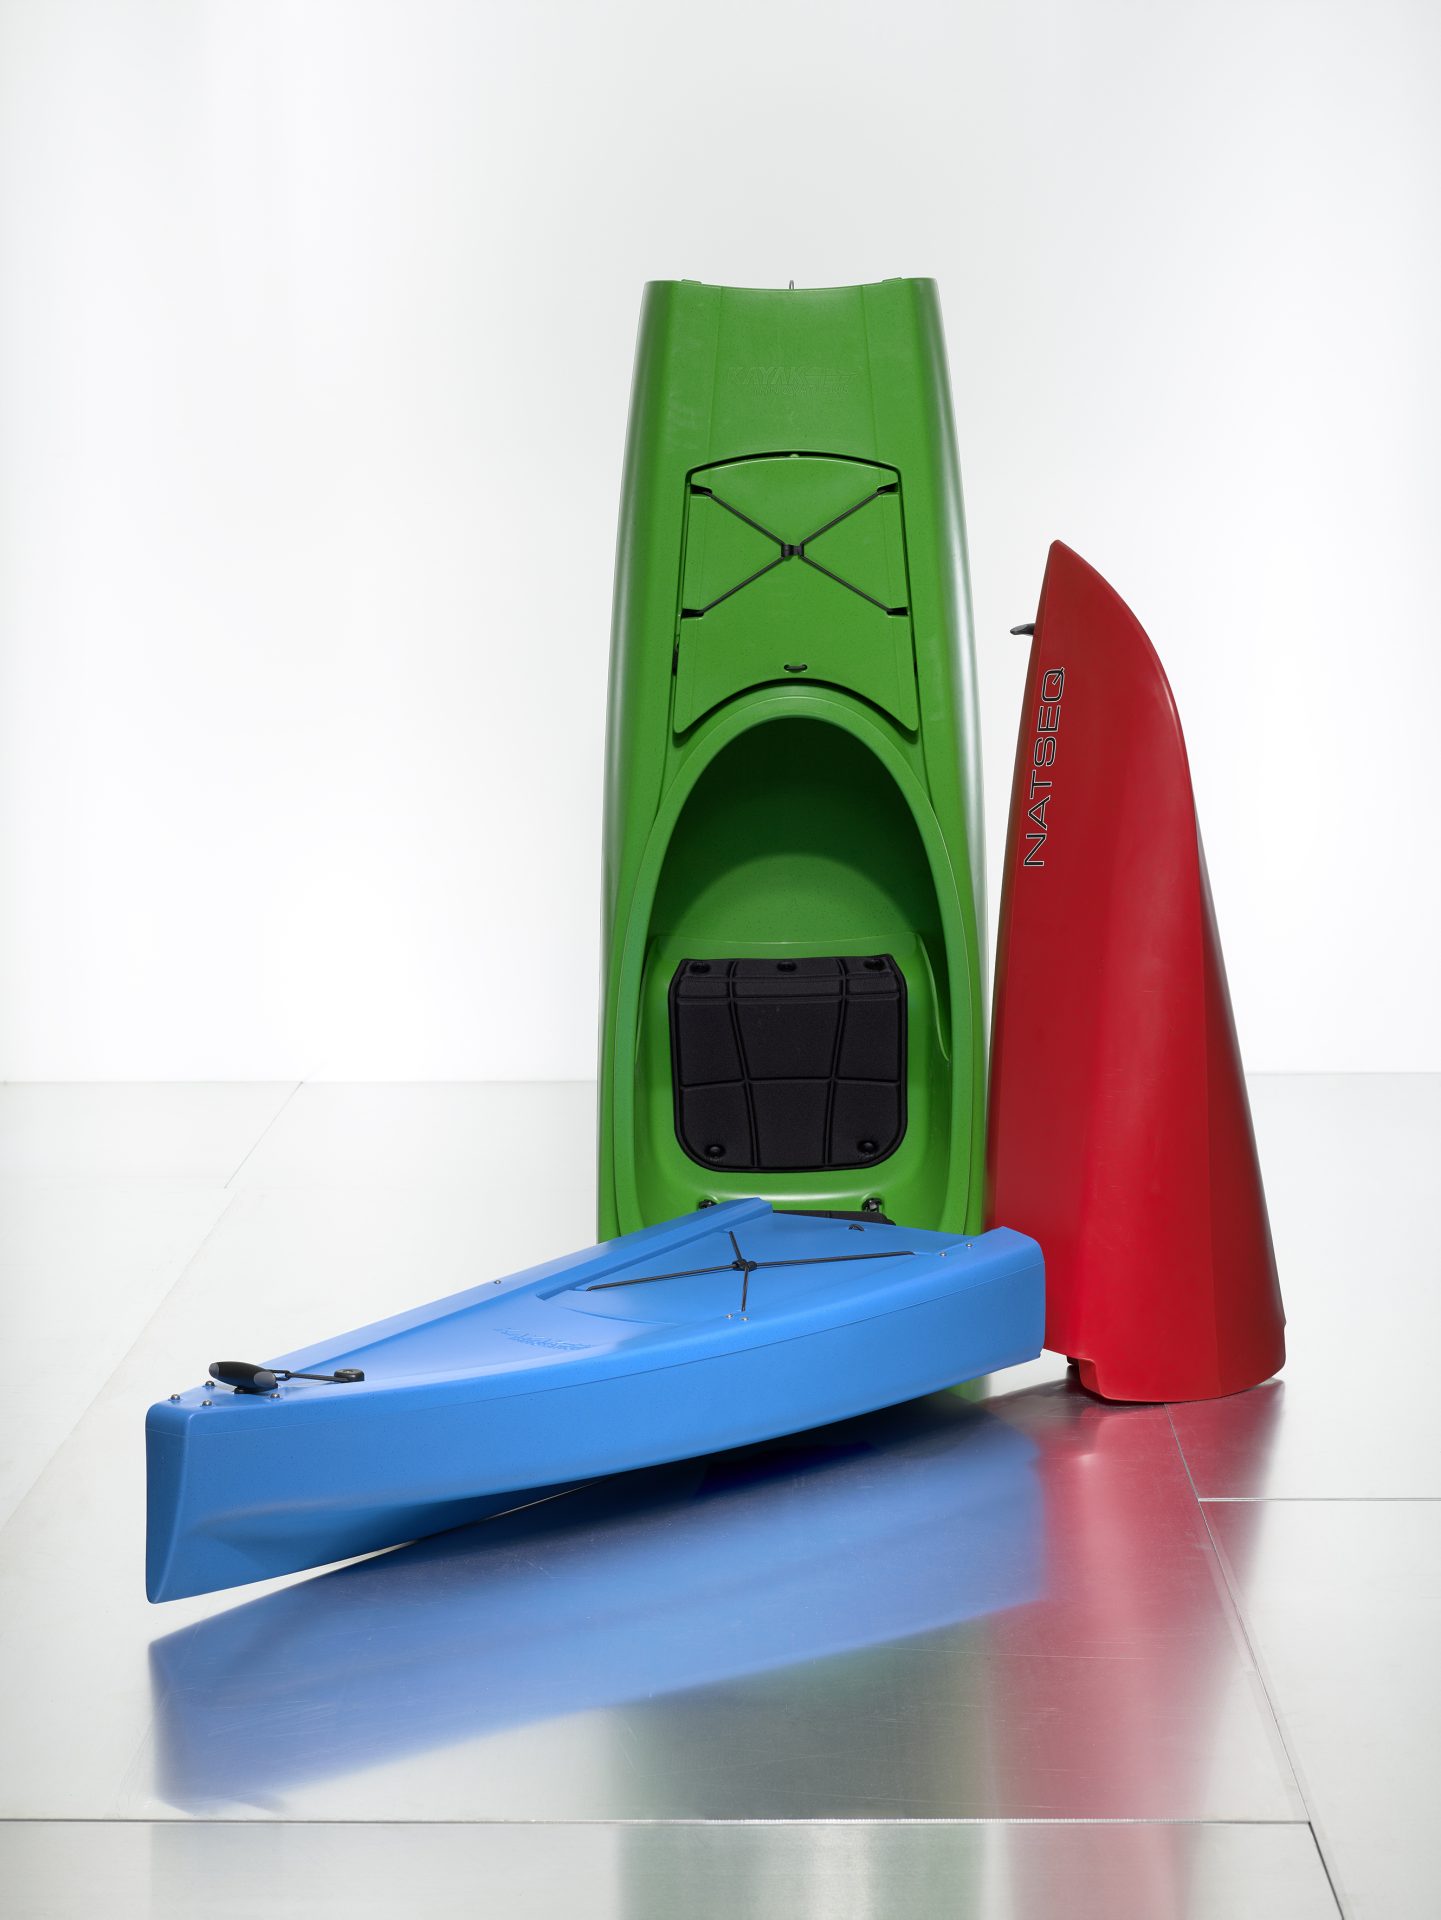 View of a disassembled plastic kayak